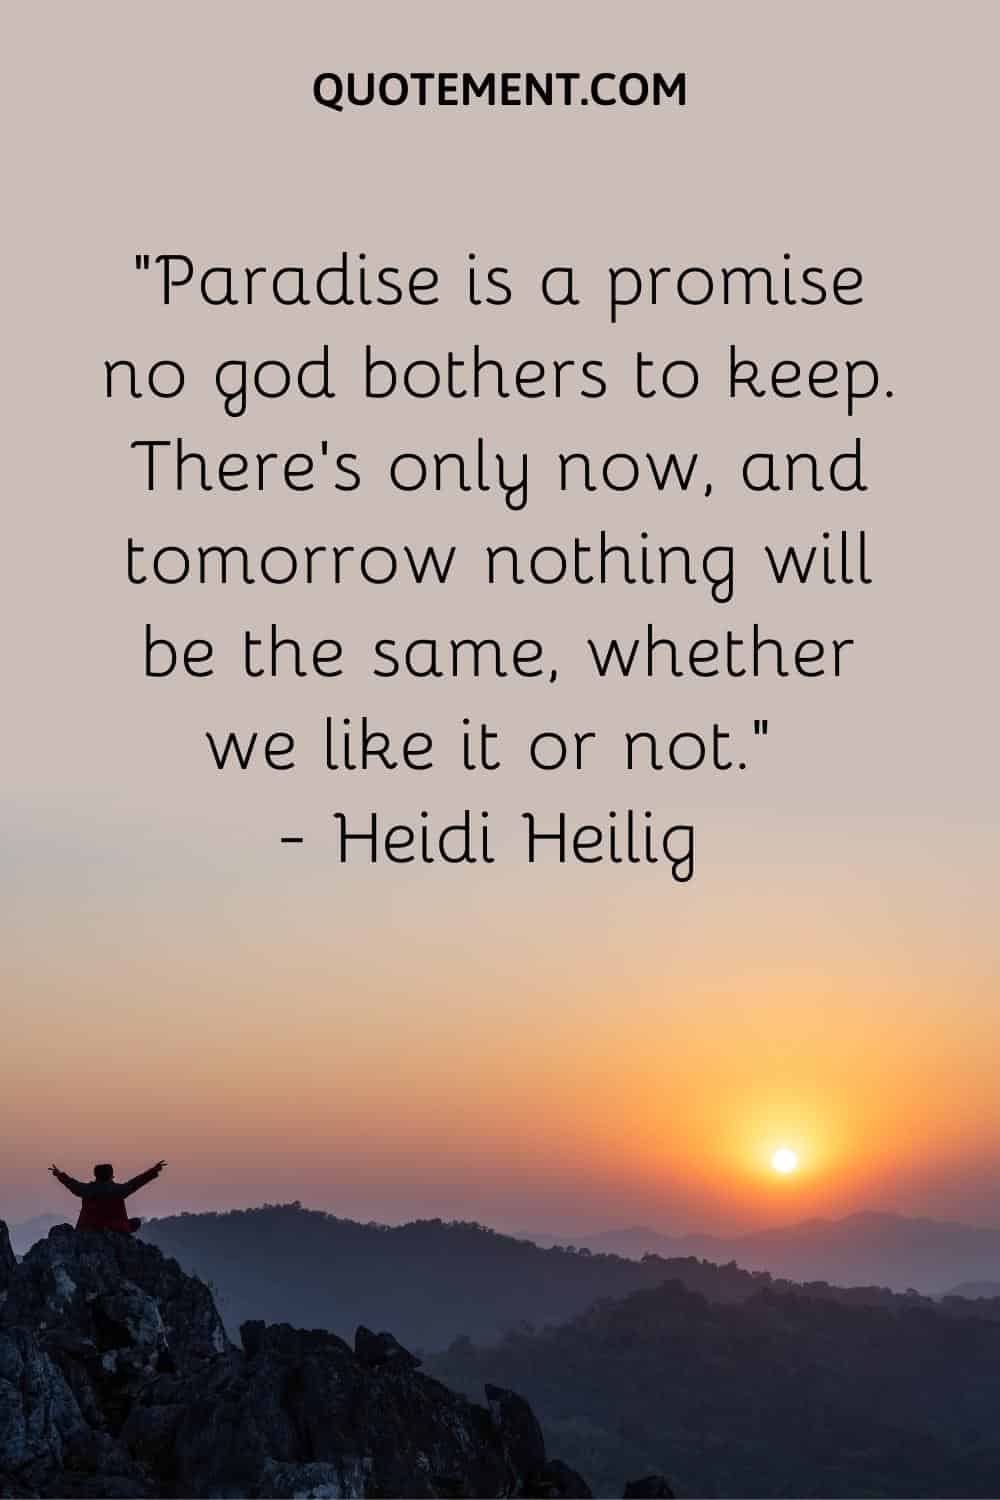 Paradise is a promise no god bothers to keep